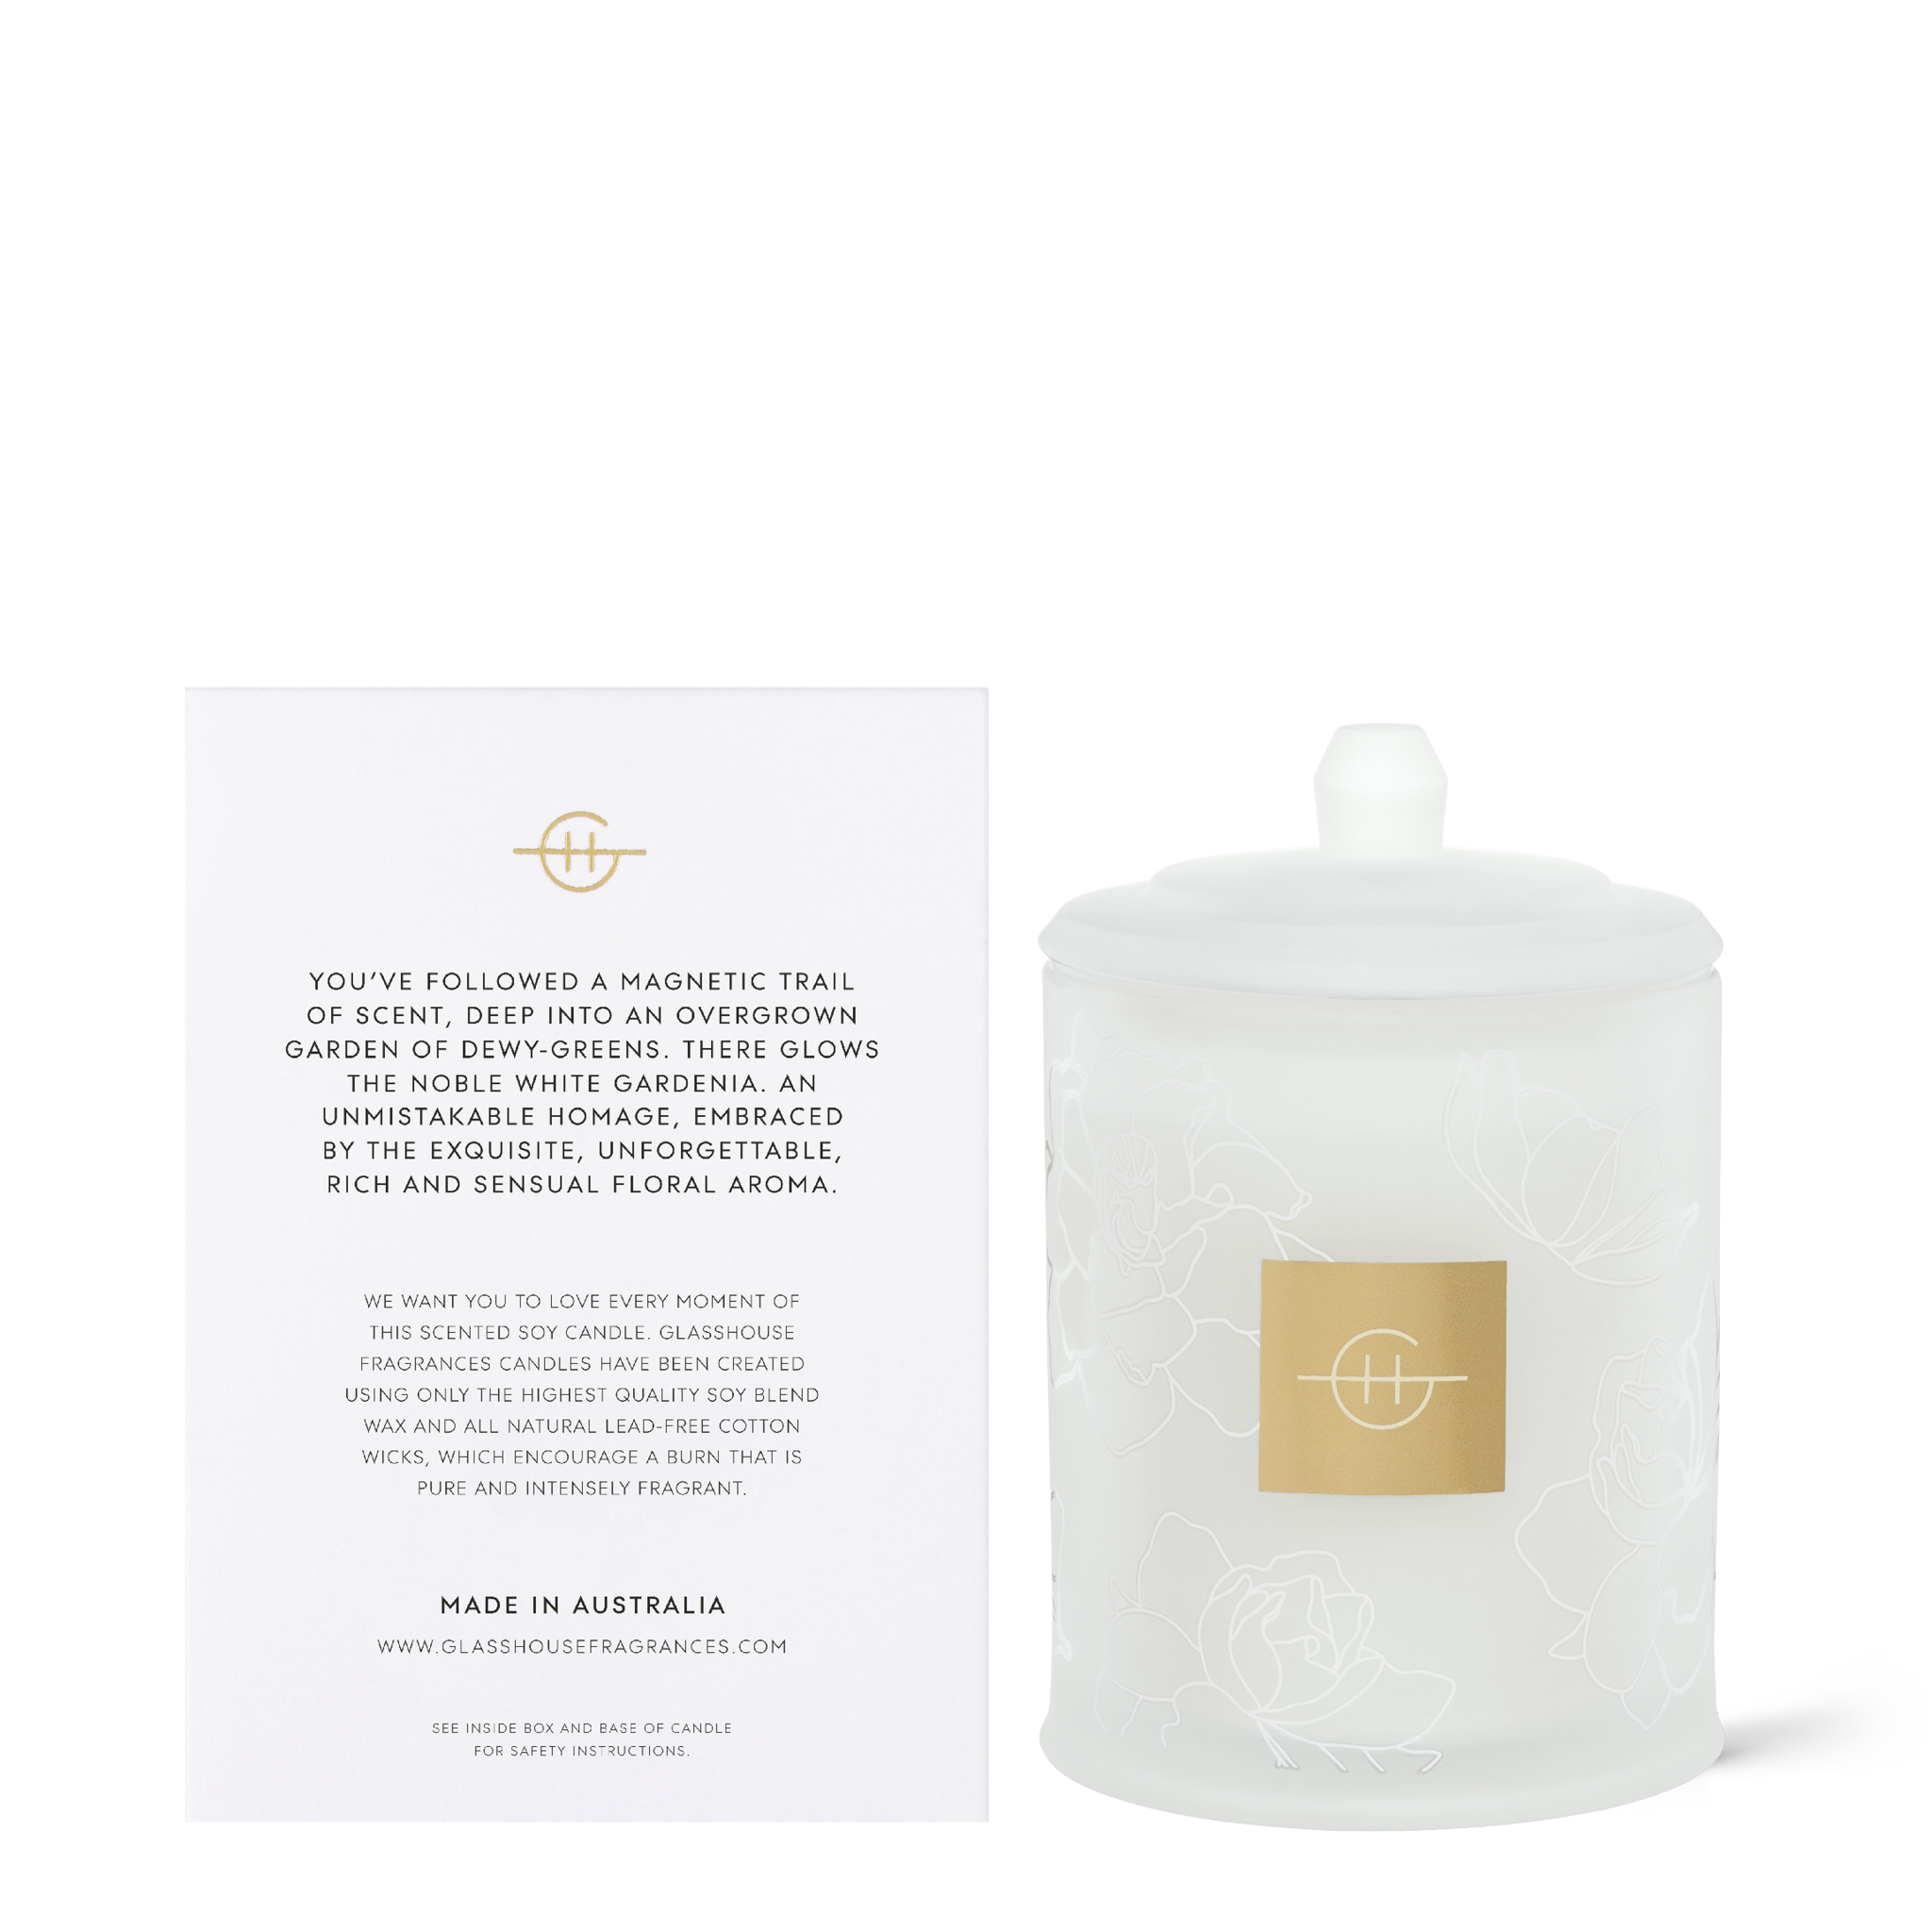 Back of product box and candle of Gardenia Inoubliable 380g Soy Candle by Glasshouse Fragrances